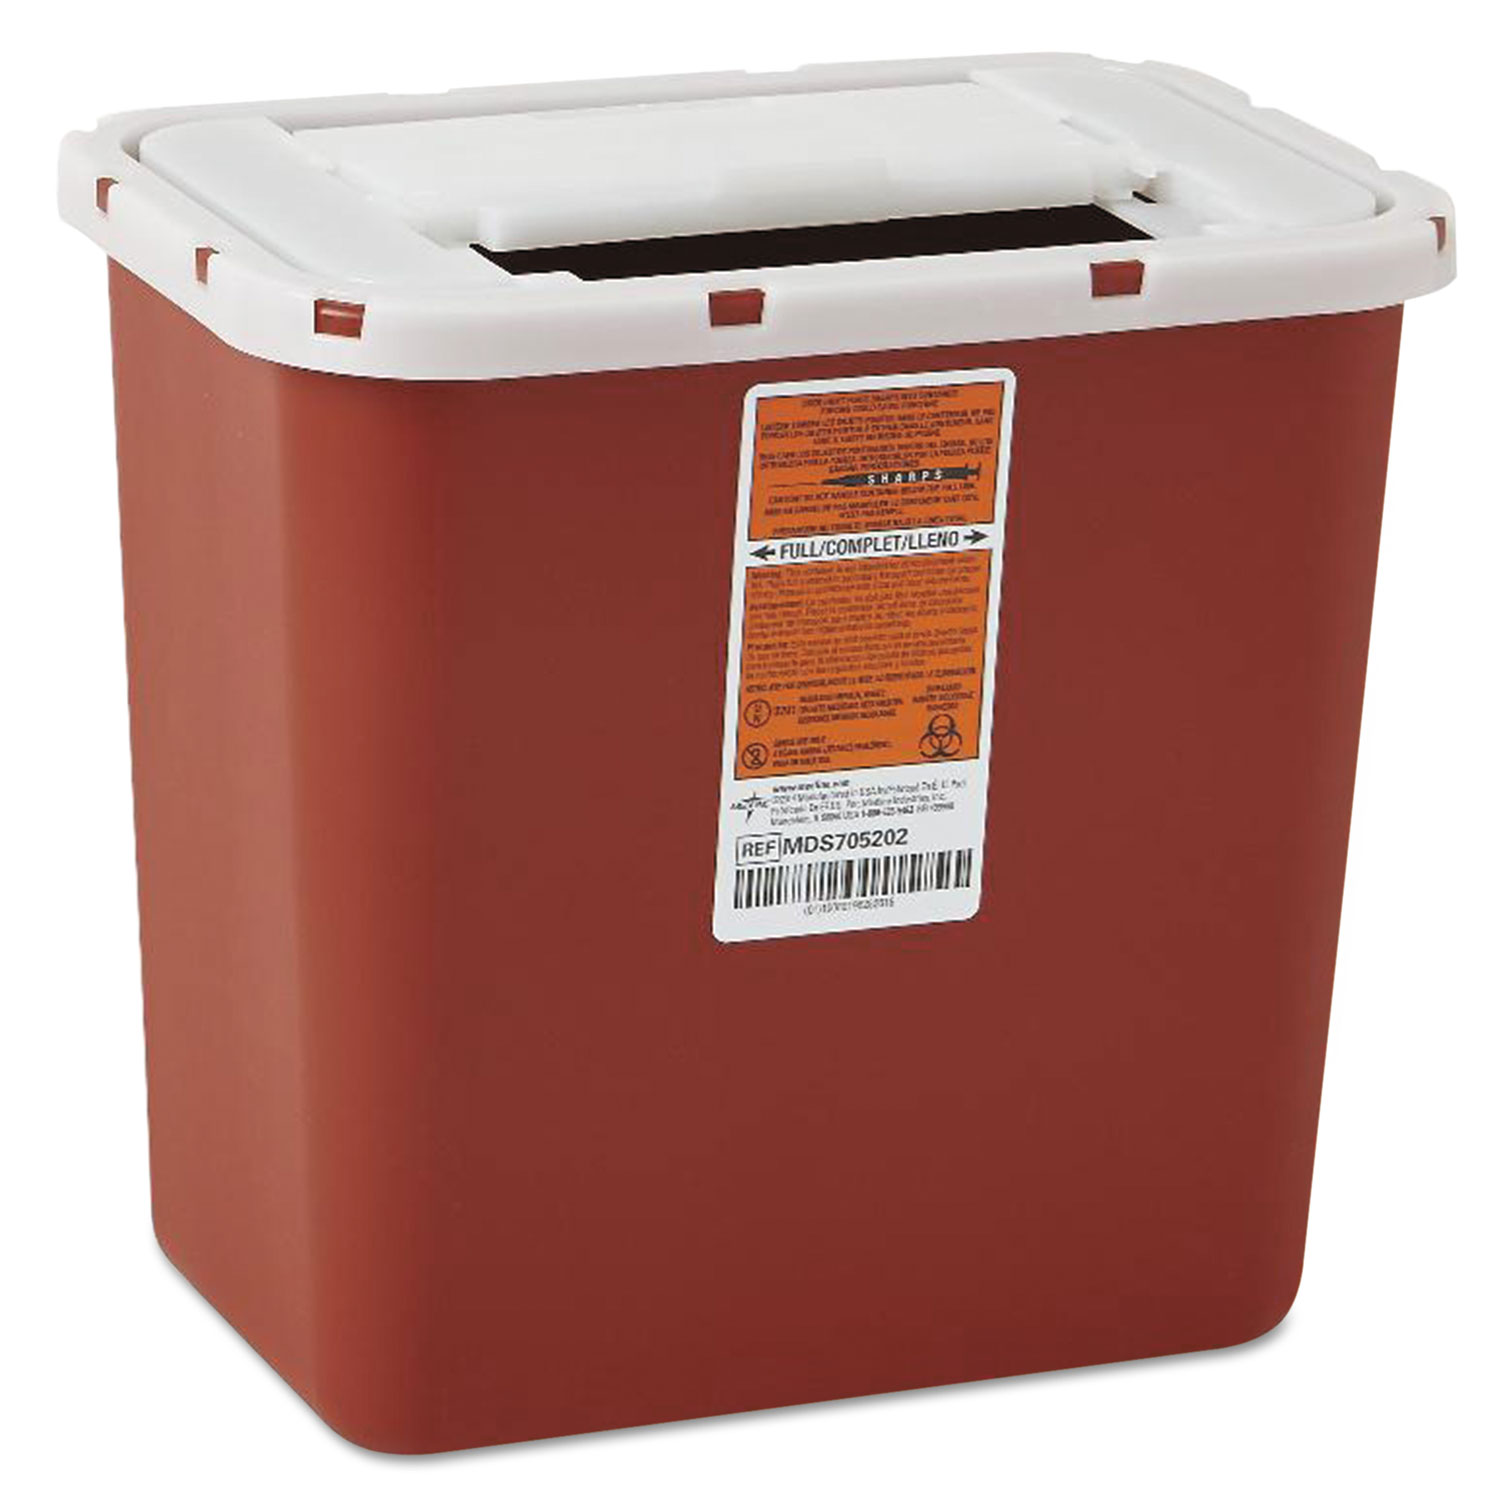  Medline MDS705151 Sharps Container, Freestanding/Wall Mountable, 8 qt, Red (MIIMDS705202) 